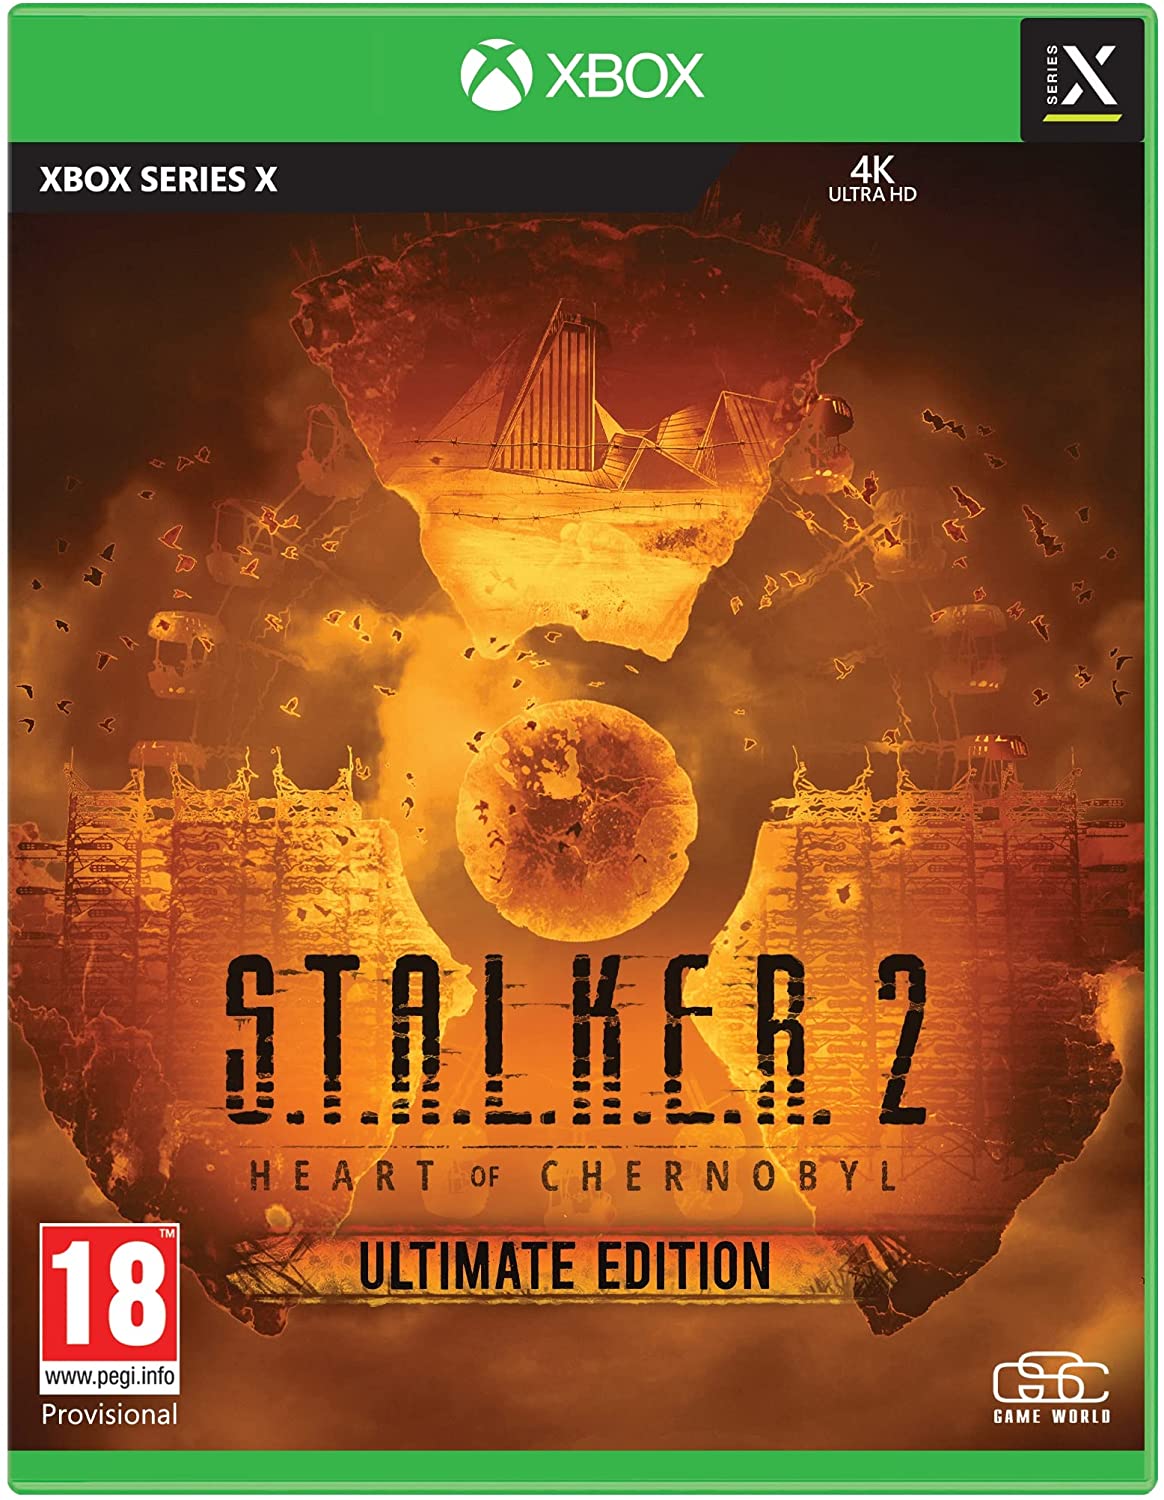 S.T.A.L.K.E.R. 2: Heart of Chernobyl - Ultimate Edition (Xbox Series X)